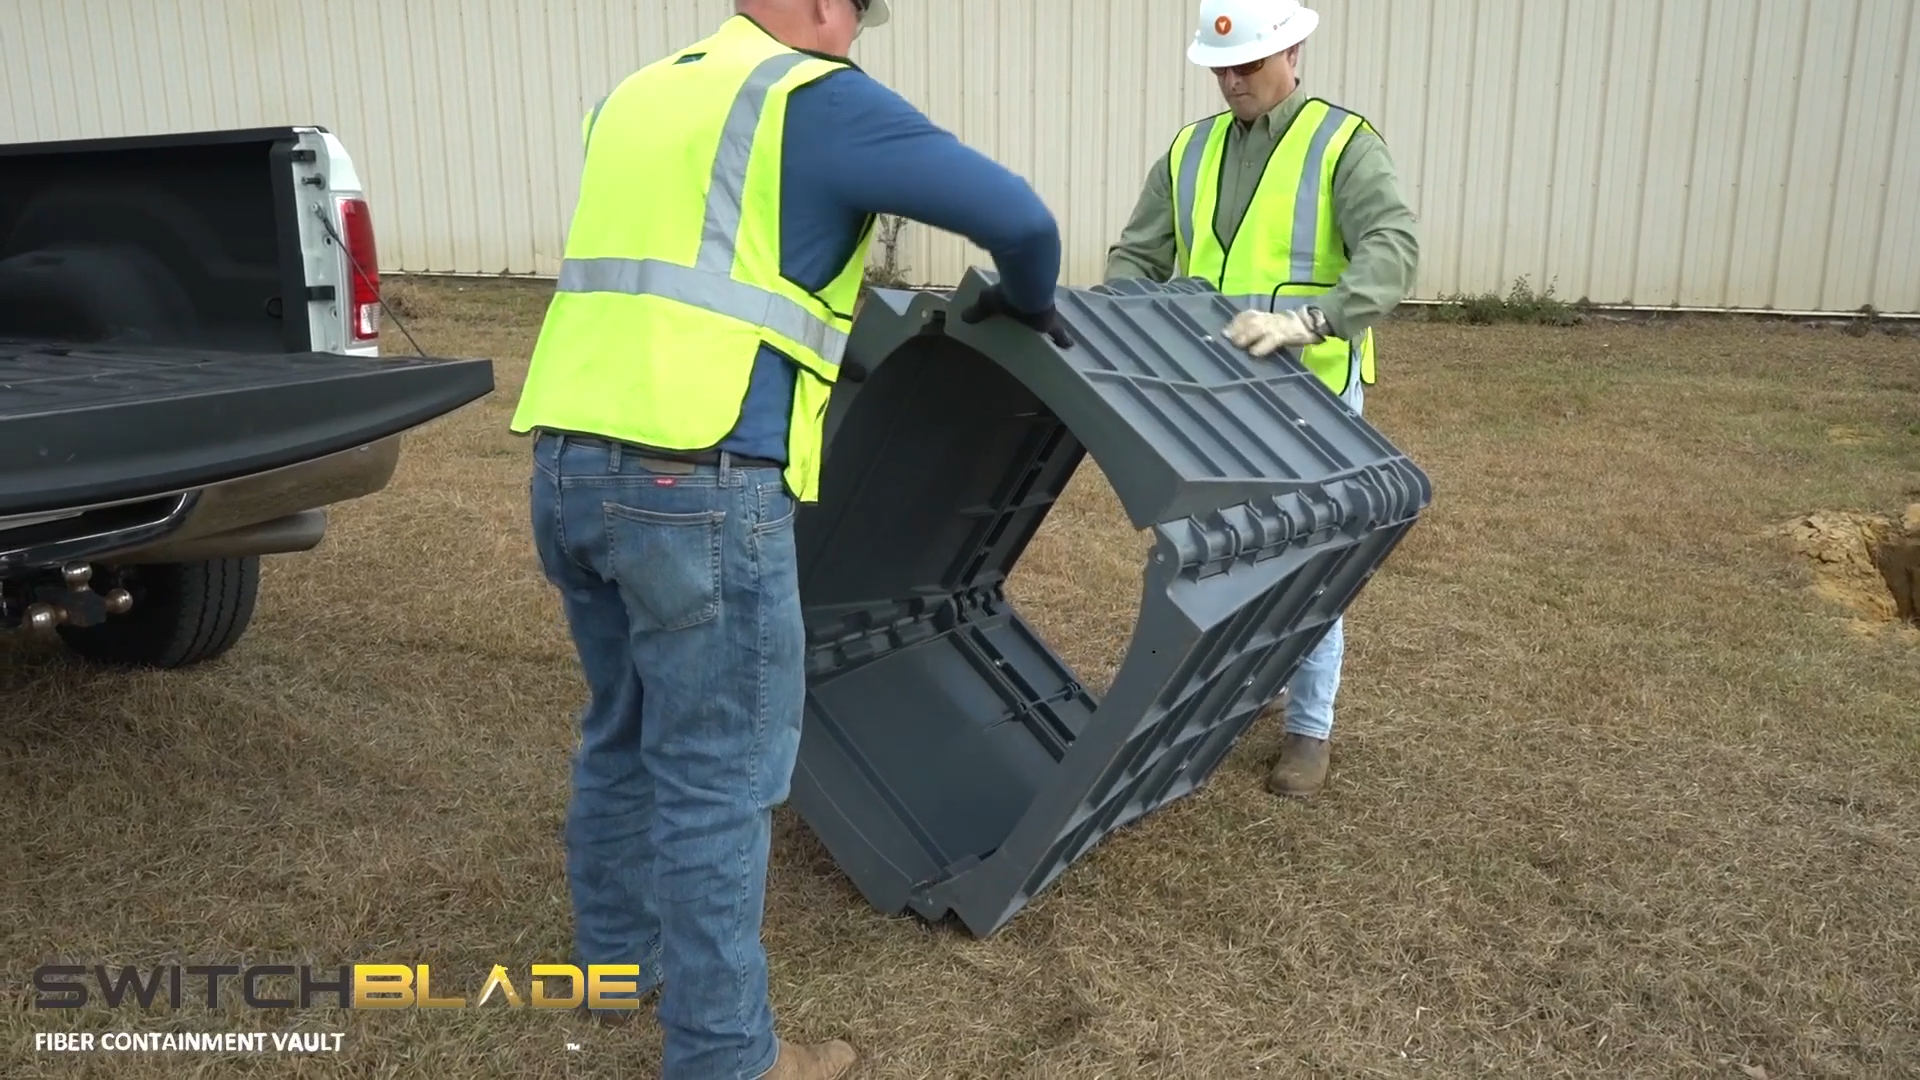 Learn more about the AFL Switchblade™ Fiber Containment Vault.